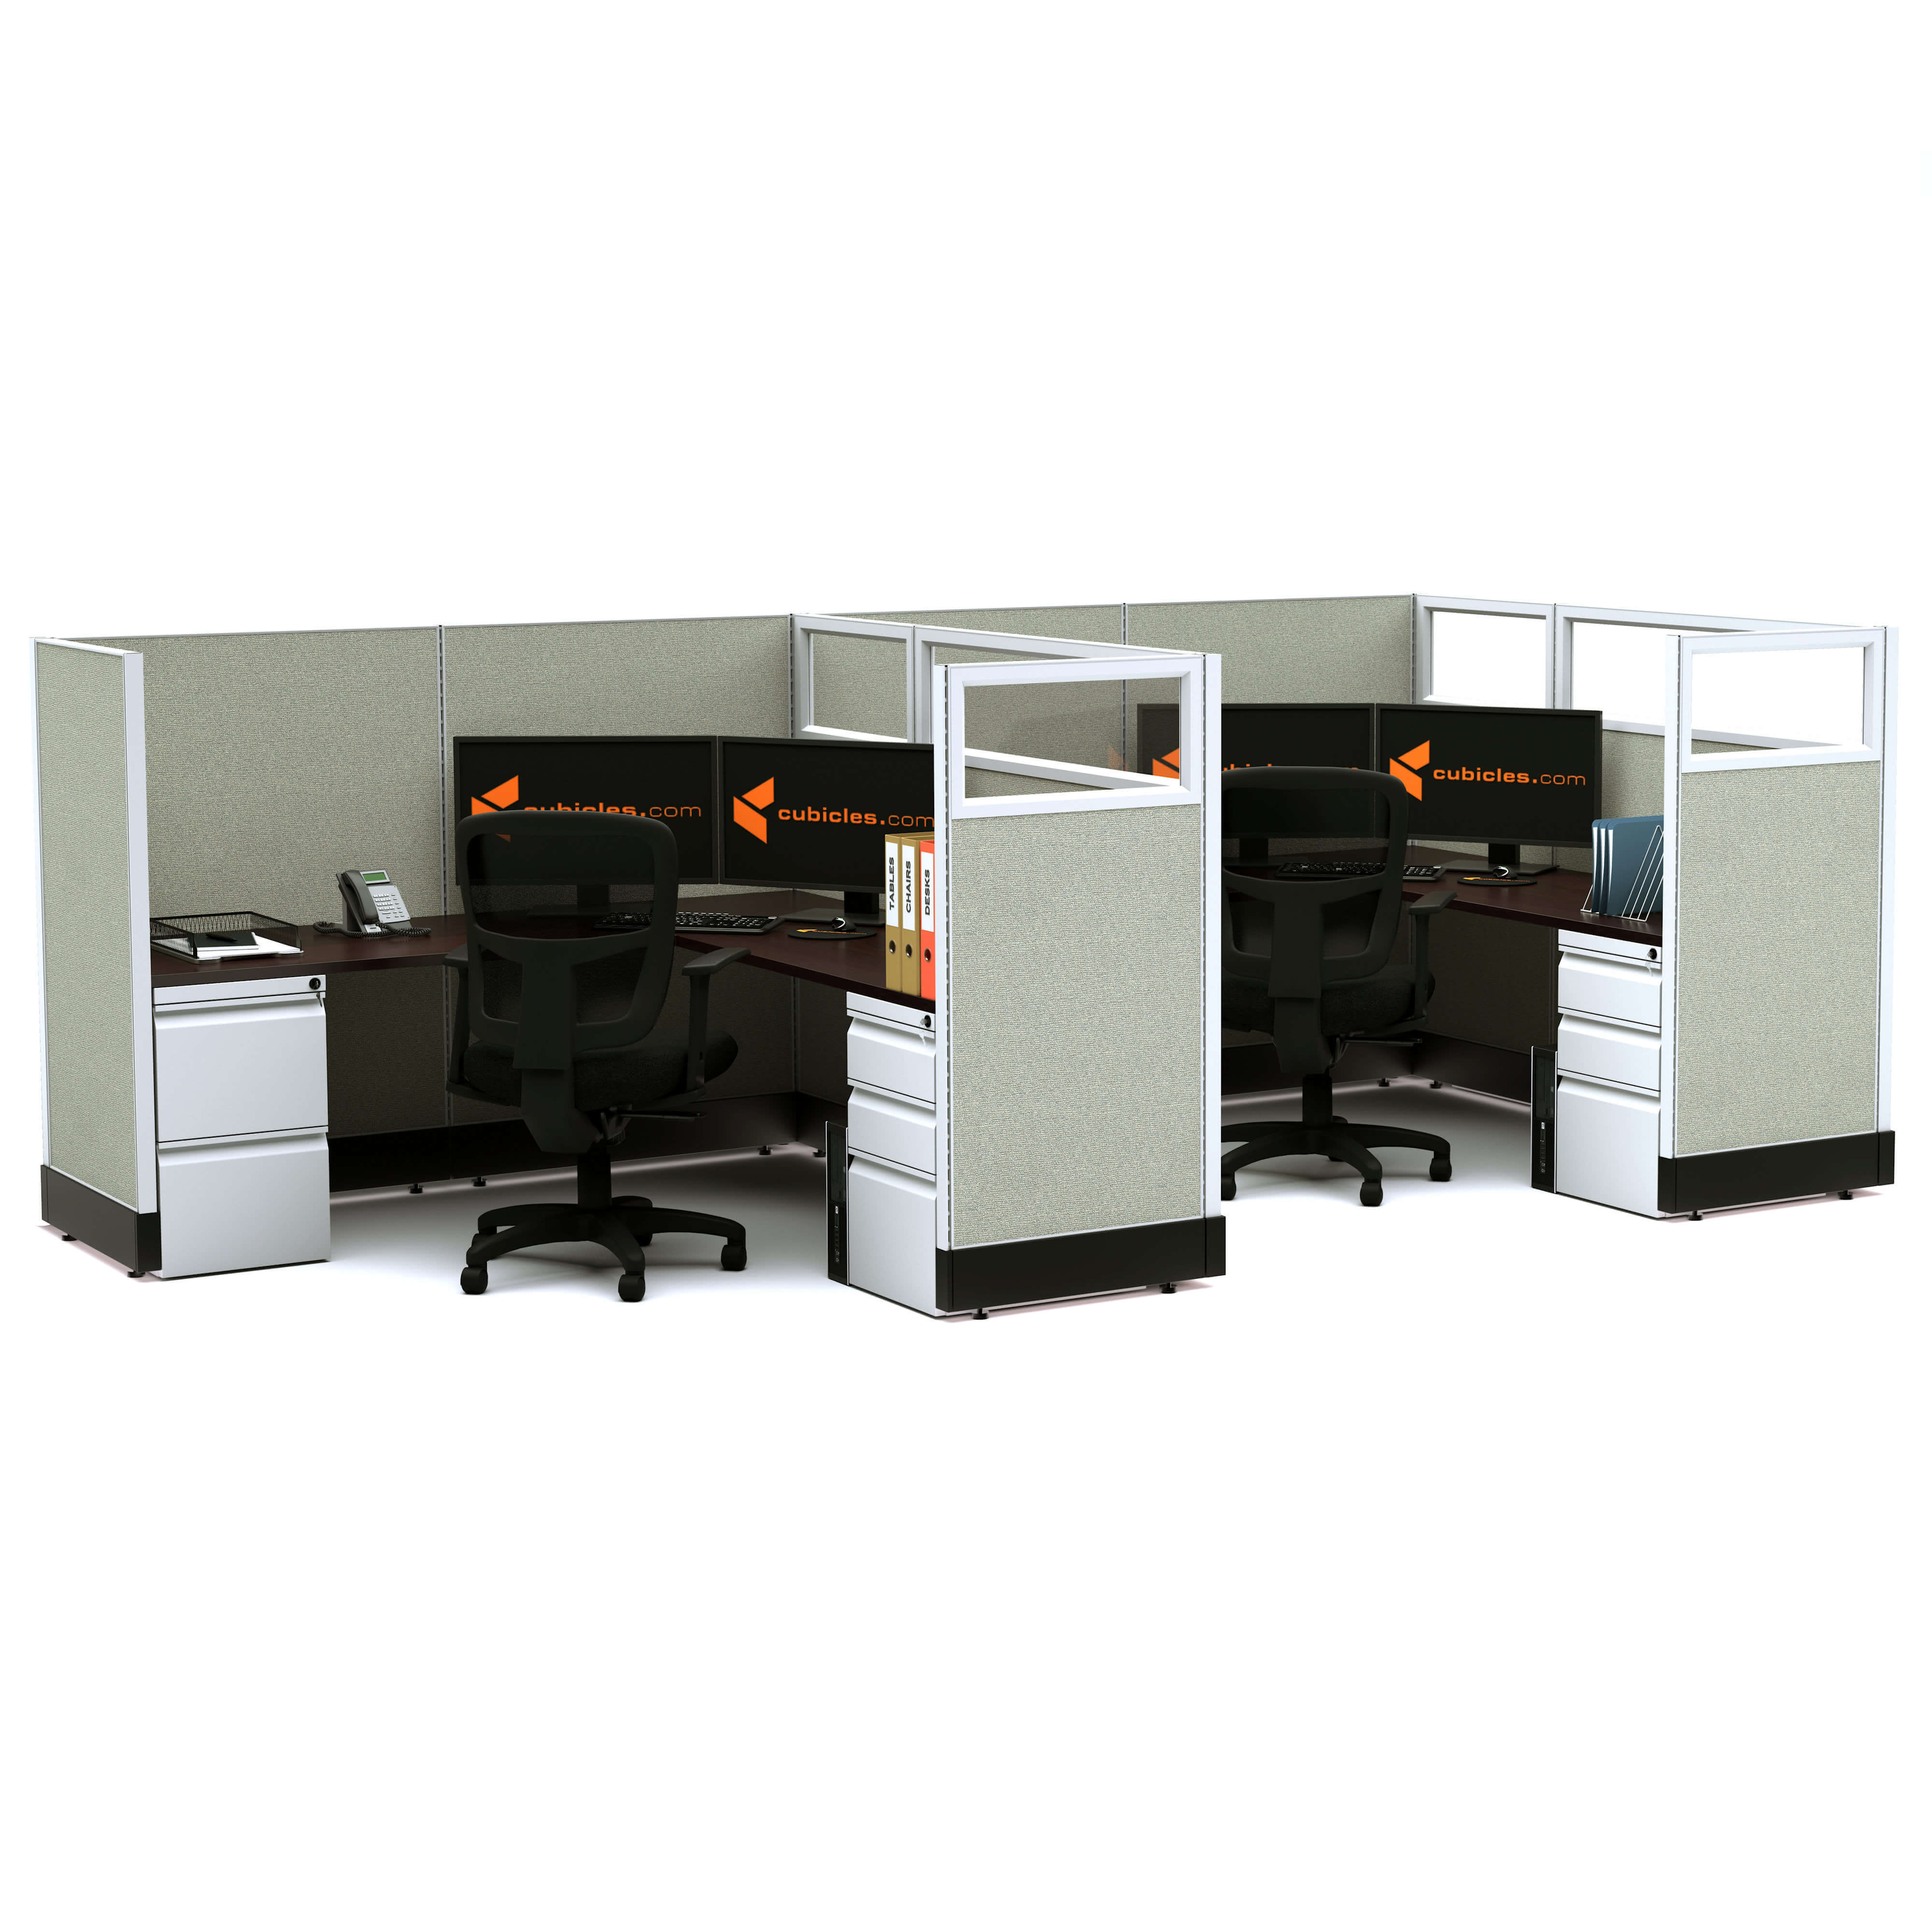 modular-office-furniture-partial-glass-office-cubicles-53h-2pack-inline-power.jpg